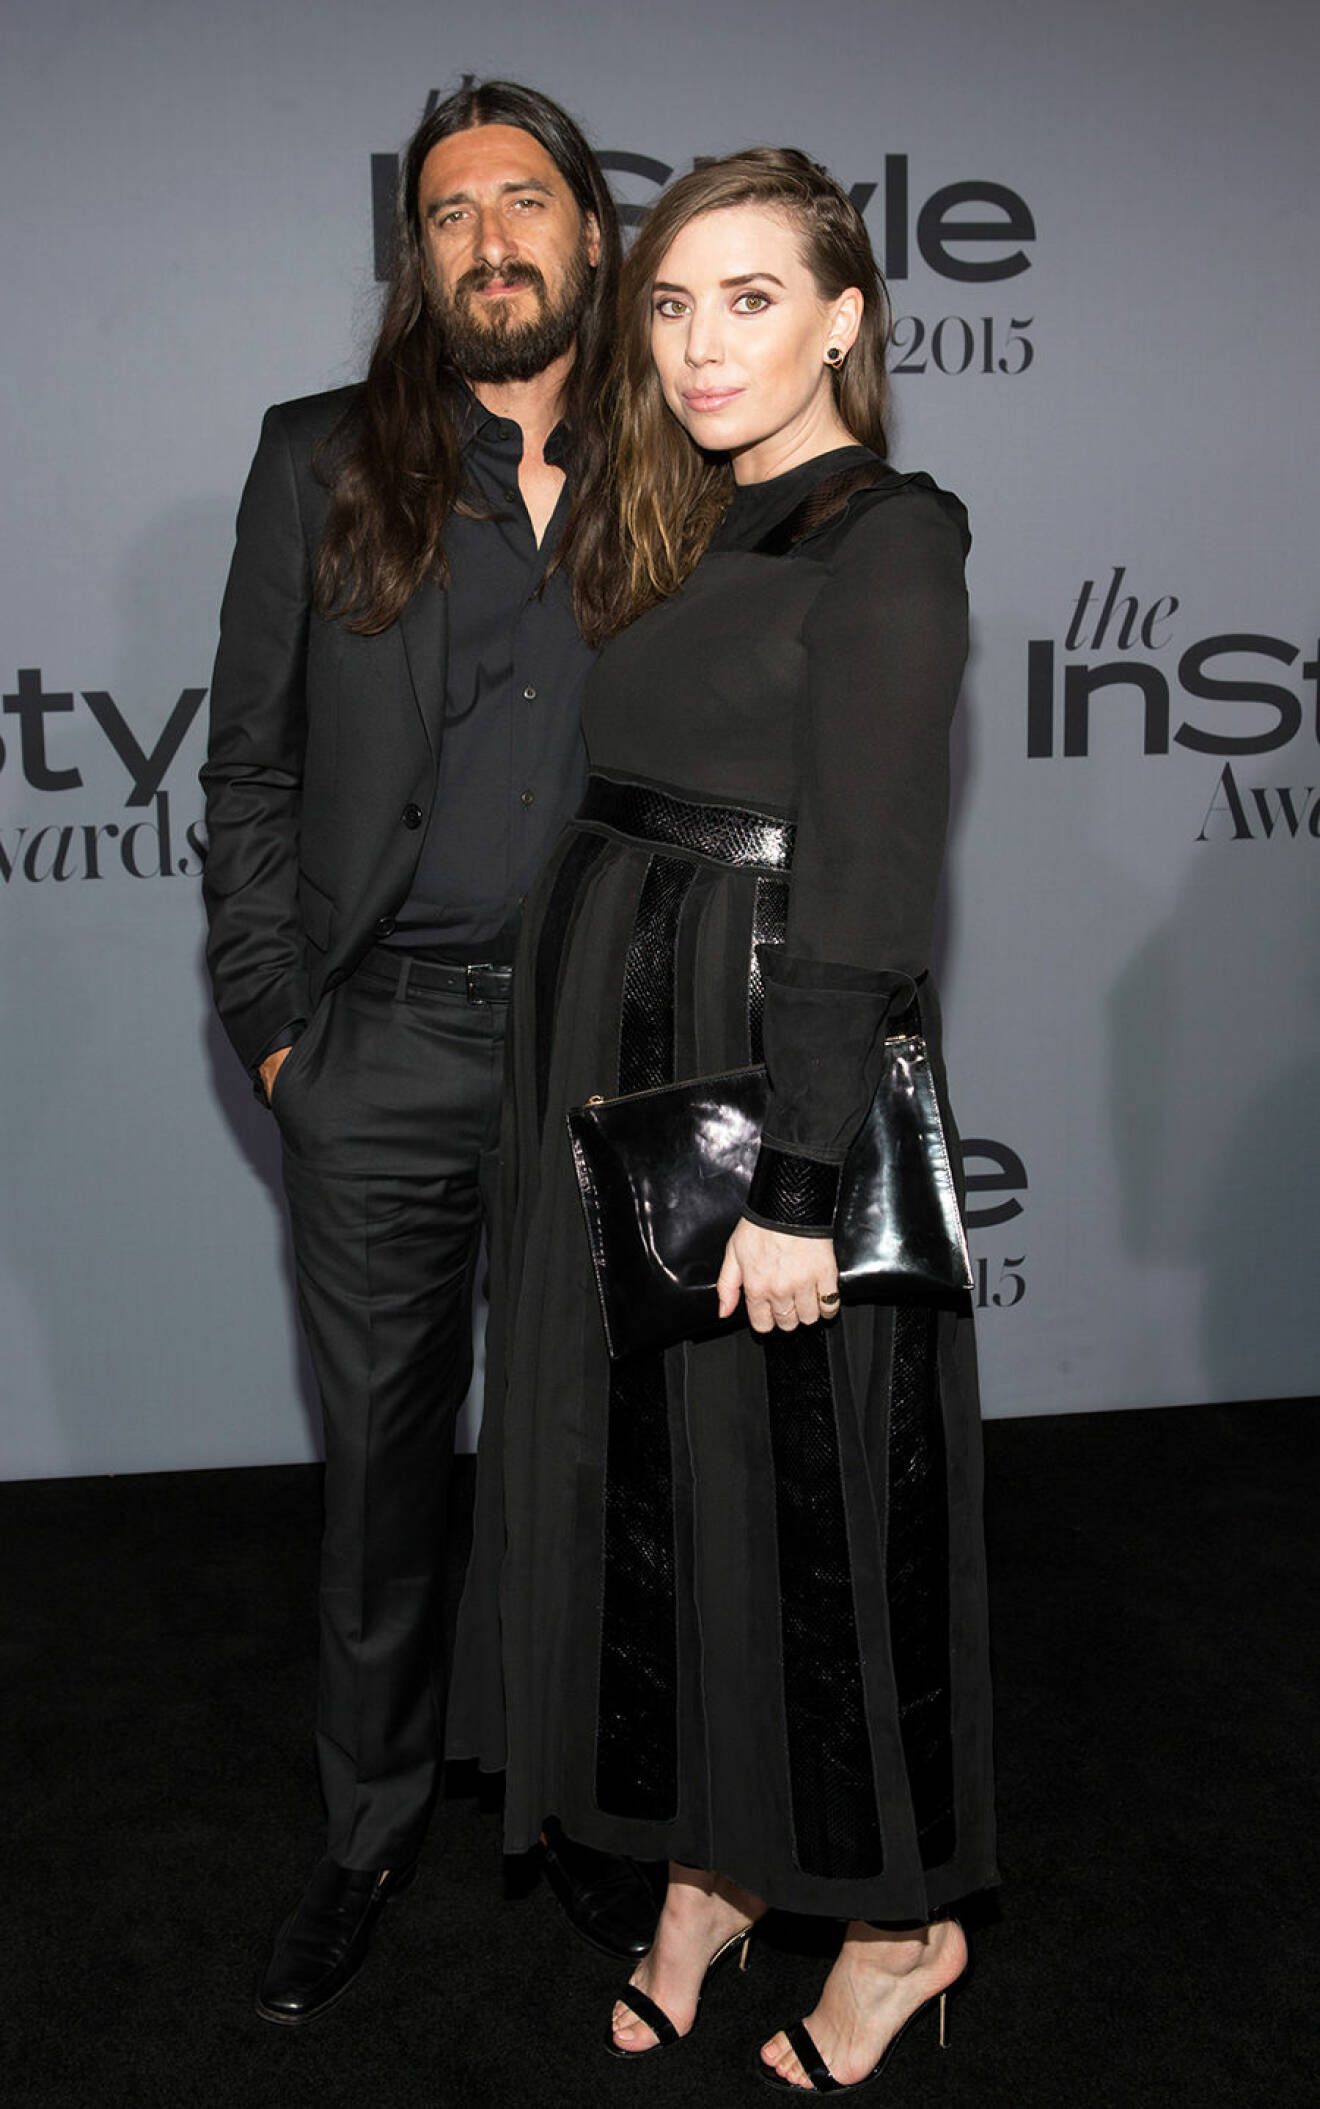 InStyle Awards, Los Angeles, America - 26 Oct 2015